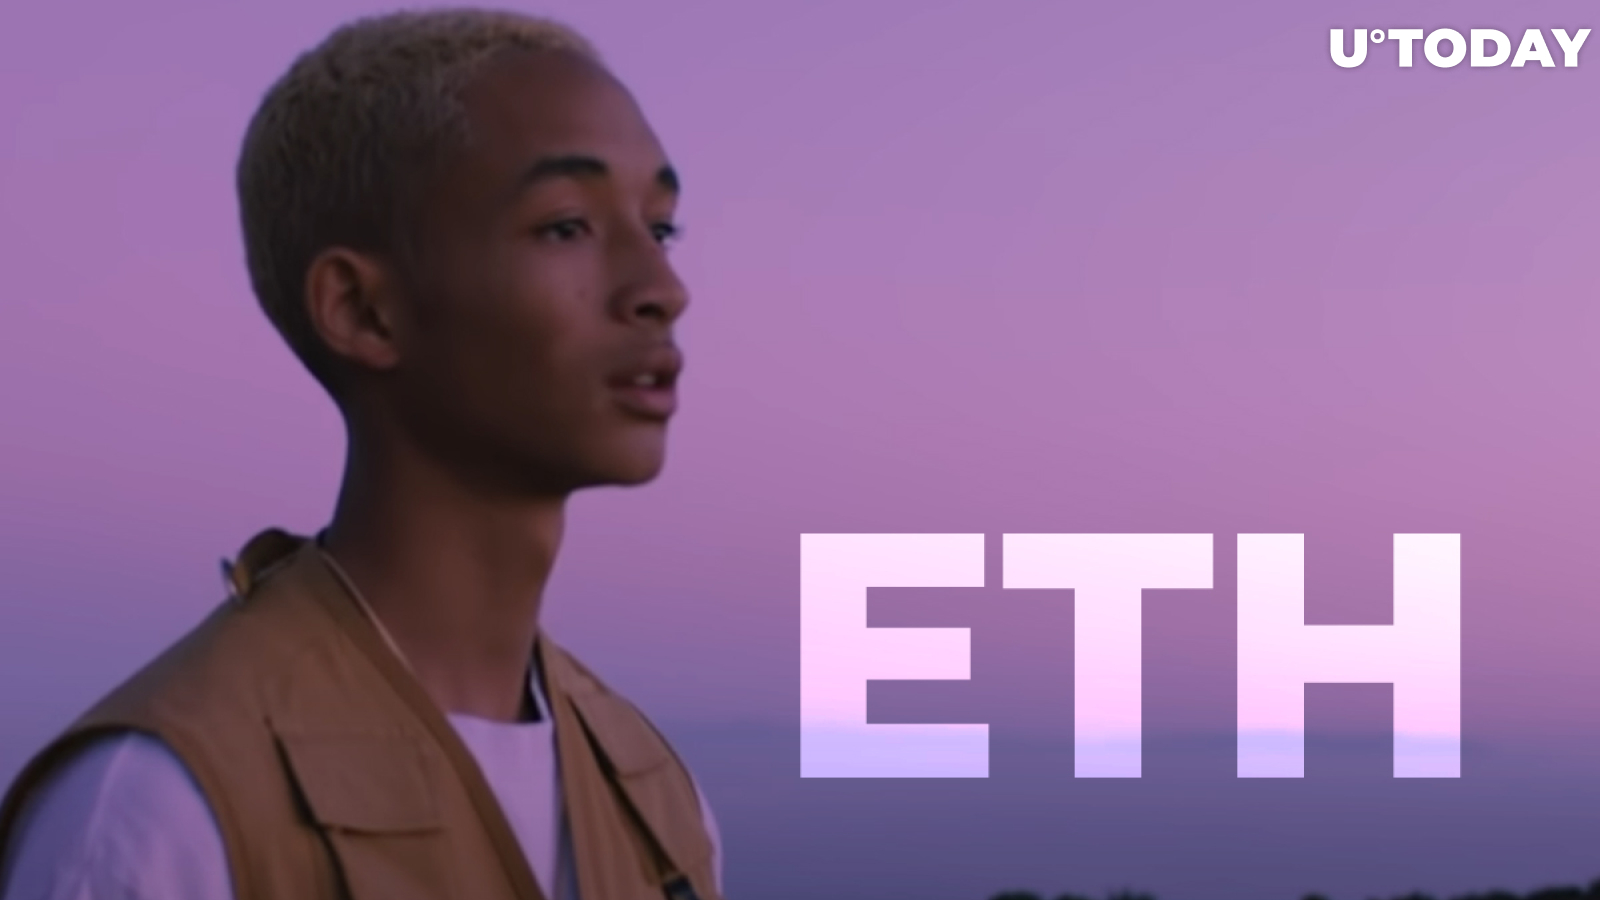 Will Smith's Son, Rapper and Actor Jaden Smith, Posts Mysterious "ETH" Tweet